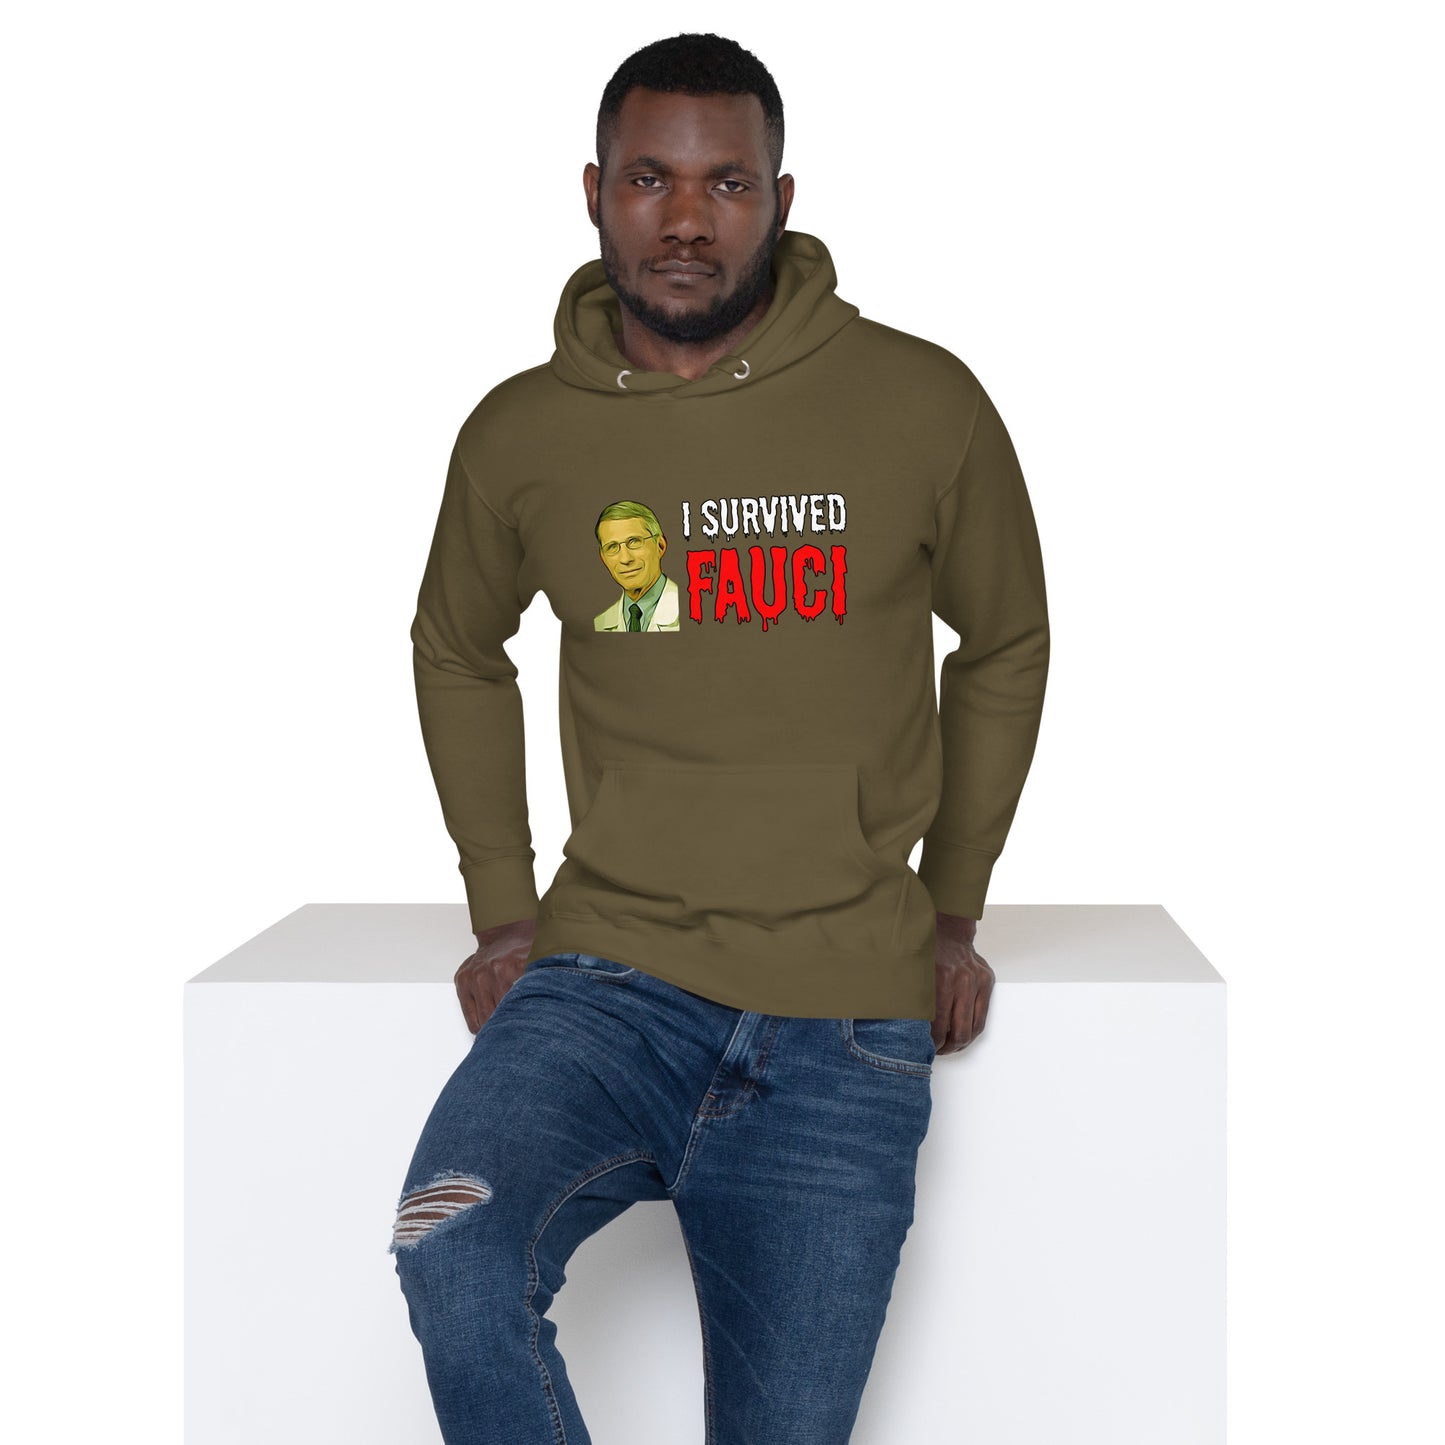 “I Survived Fauci” Unisex Hoodie